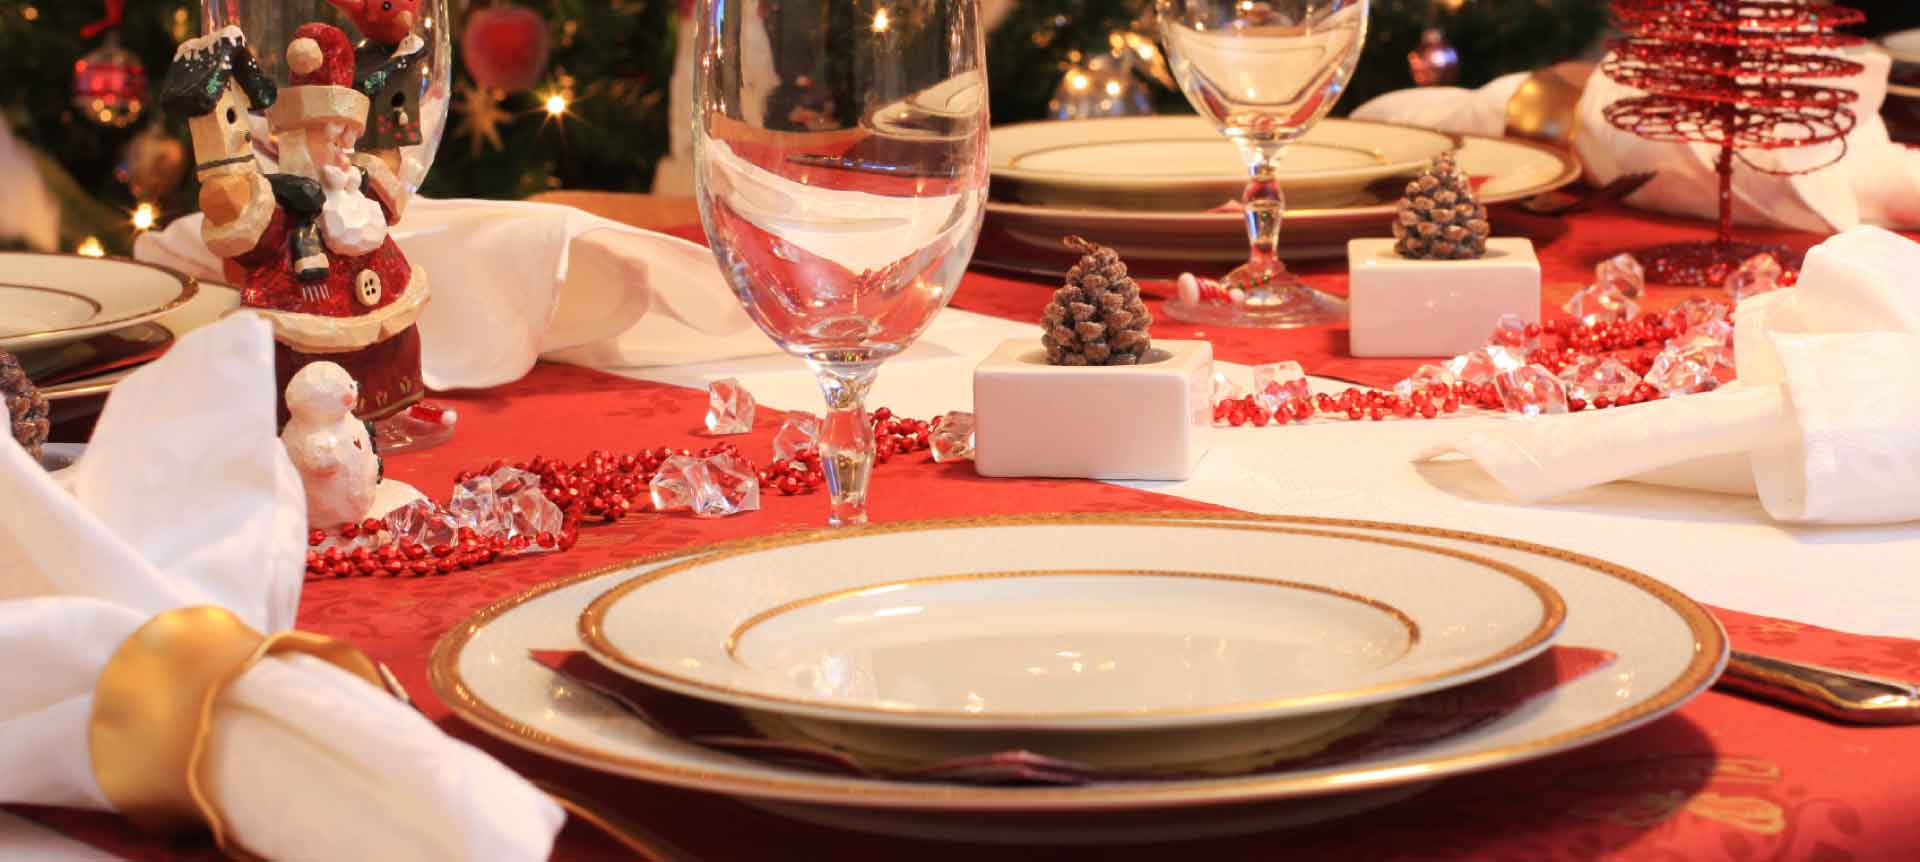 Have Dinner with Santa at Golden Ocala